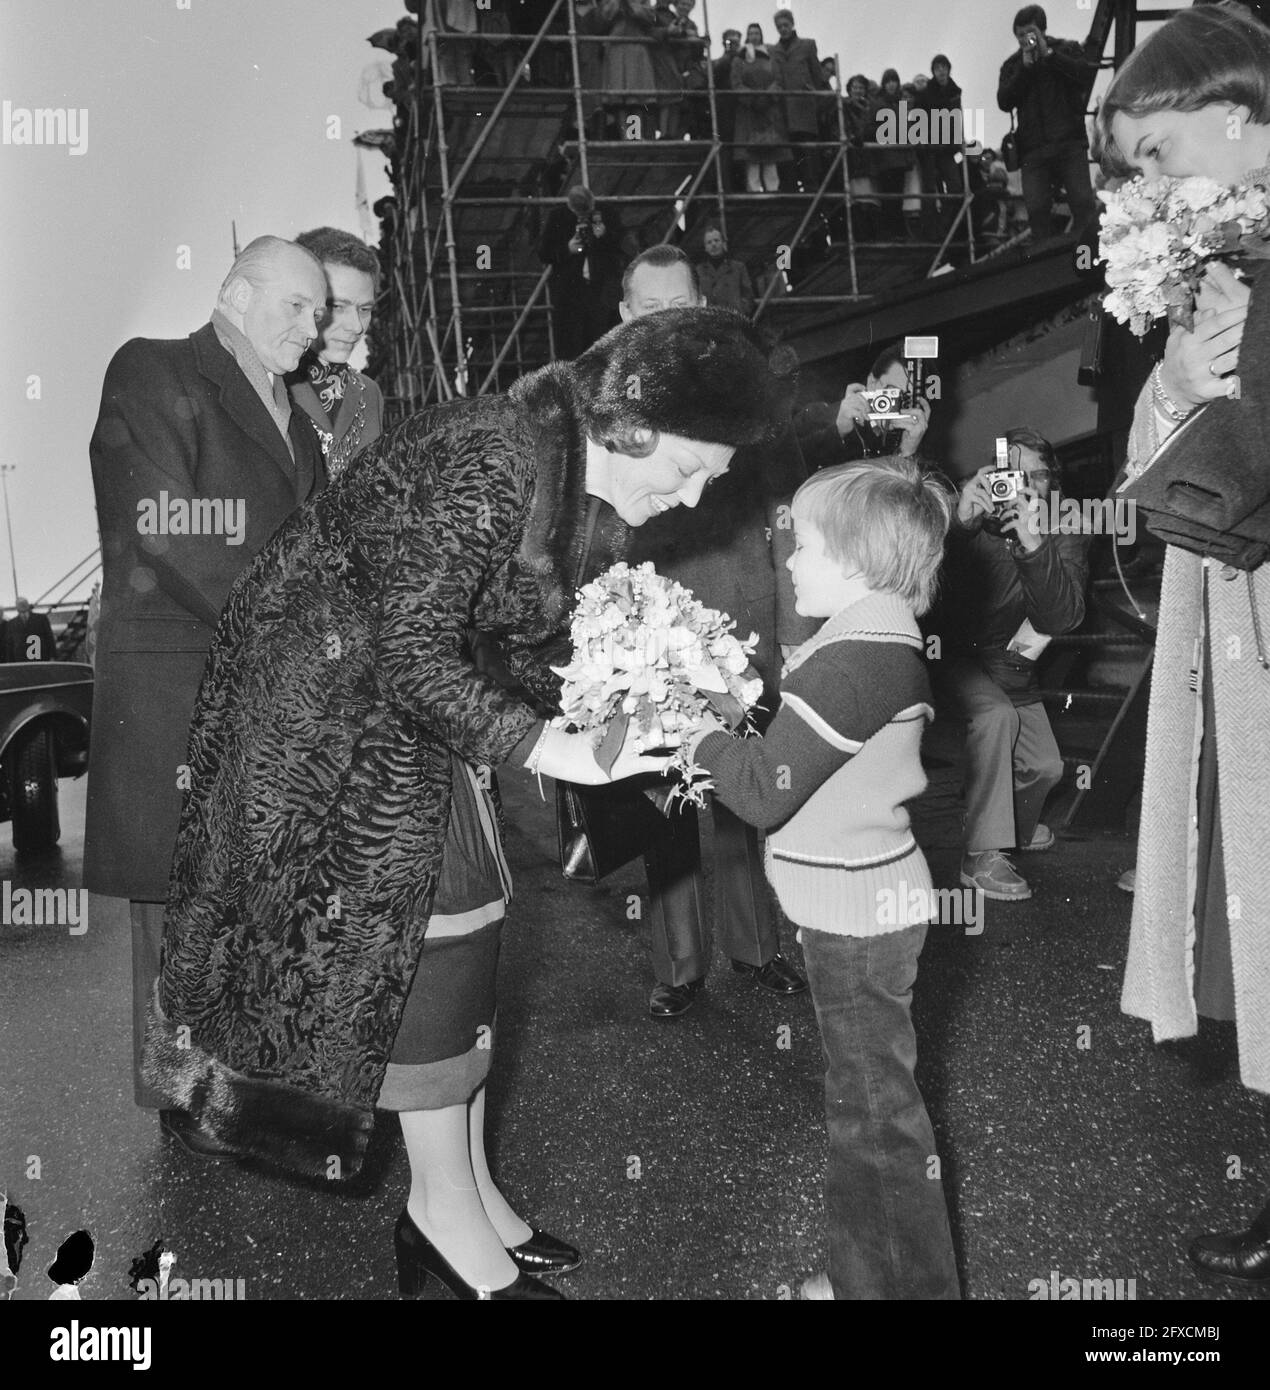 Princess Beatrix christens ferry in Heusden; Princess Beatrix receives flowers from 5-year-old Jolanda, January 14, 1978, FLOWERS, christenings, princesses, ferries, The Netherlands, 20th century press agency photo, news to remember, documentary, historic photography 1945-1990, visual stories, human history of the Twentieth Century, capturing moments in time Stock Photo